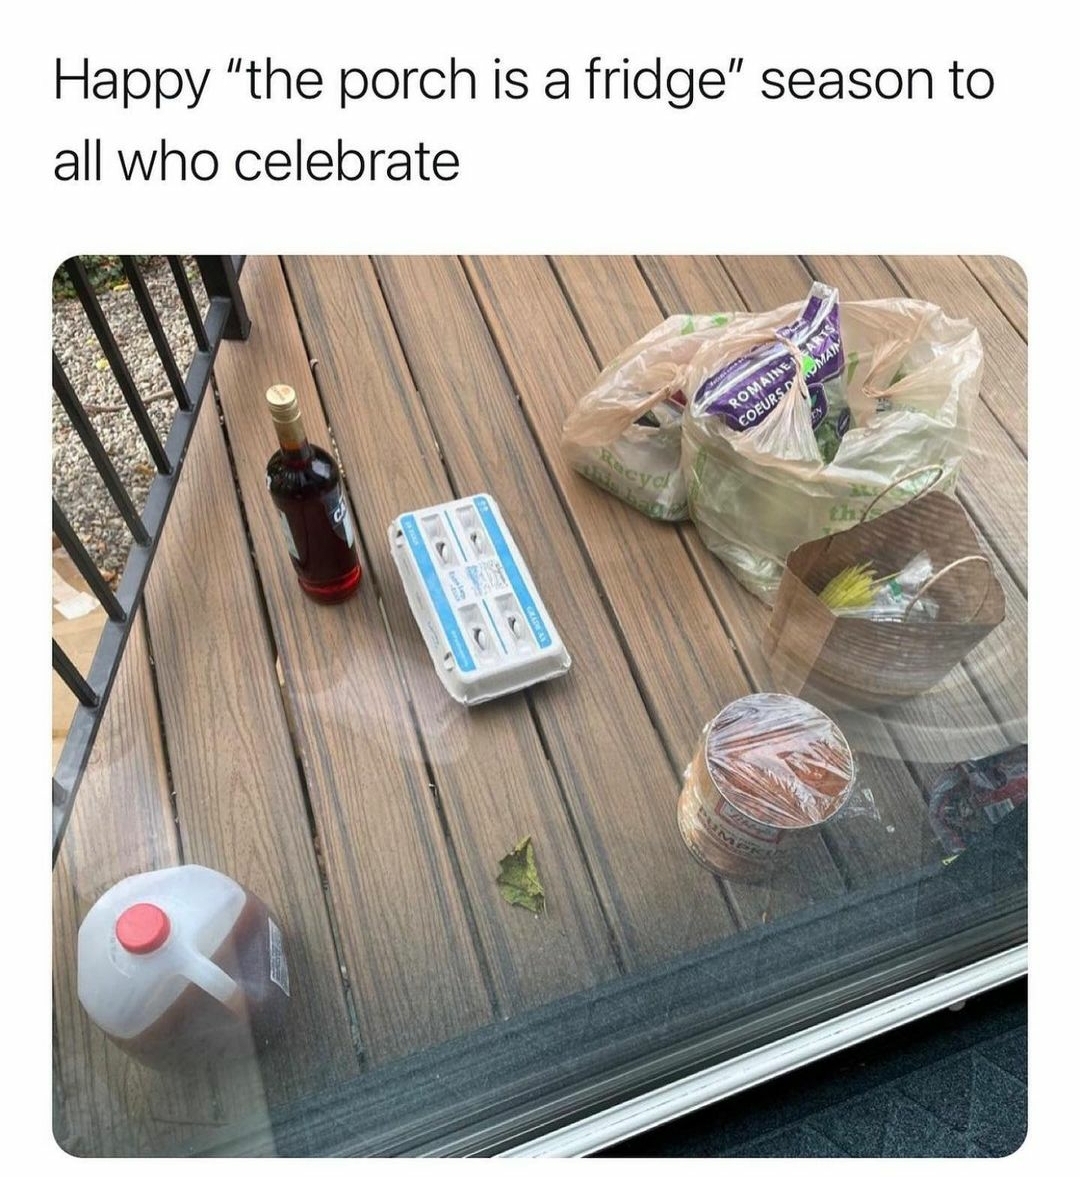 table - Happy "the porch is a fridge" season to all who celebrate Lo